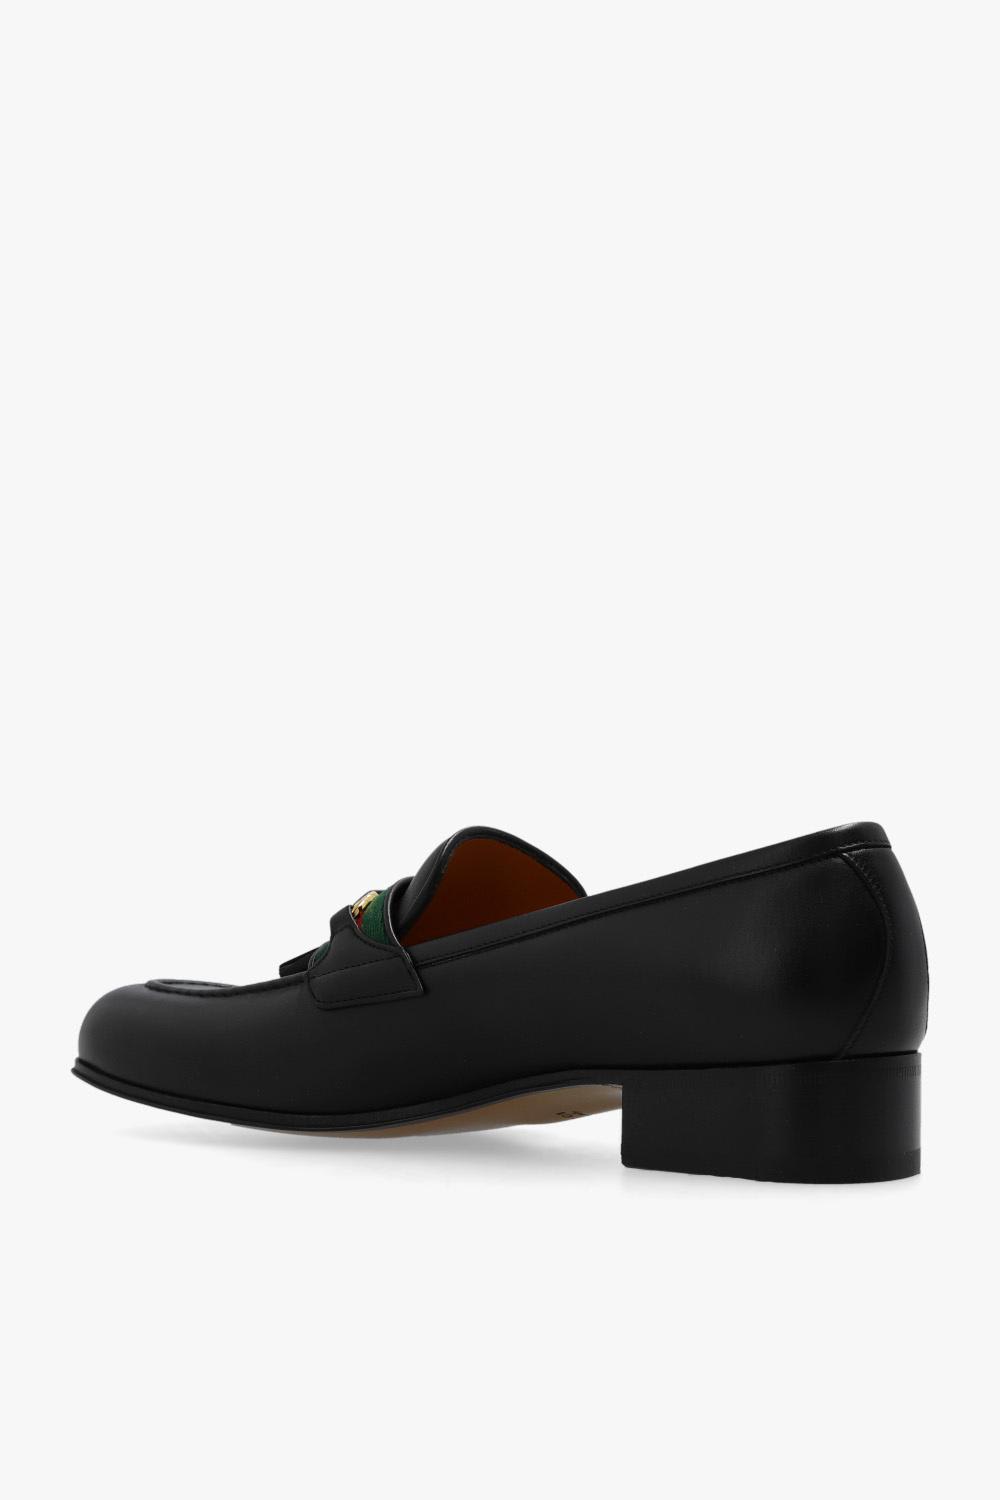 Shop Gucci Leather Loafers